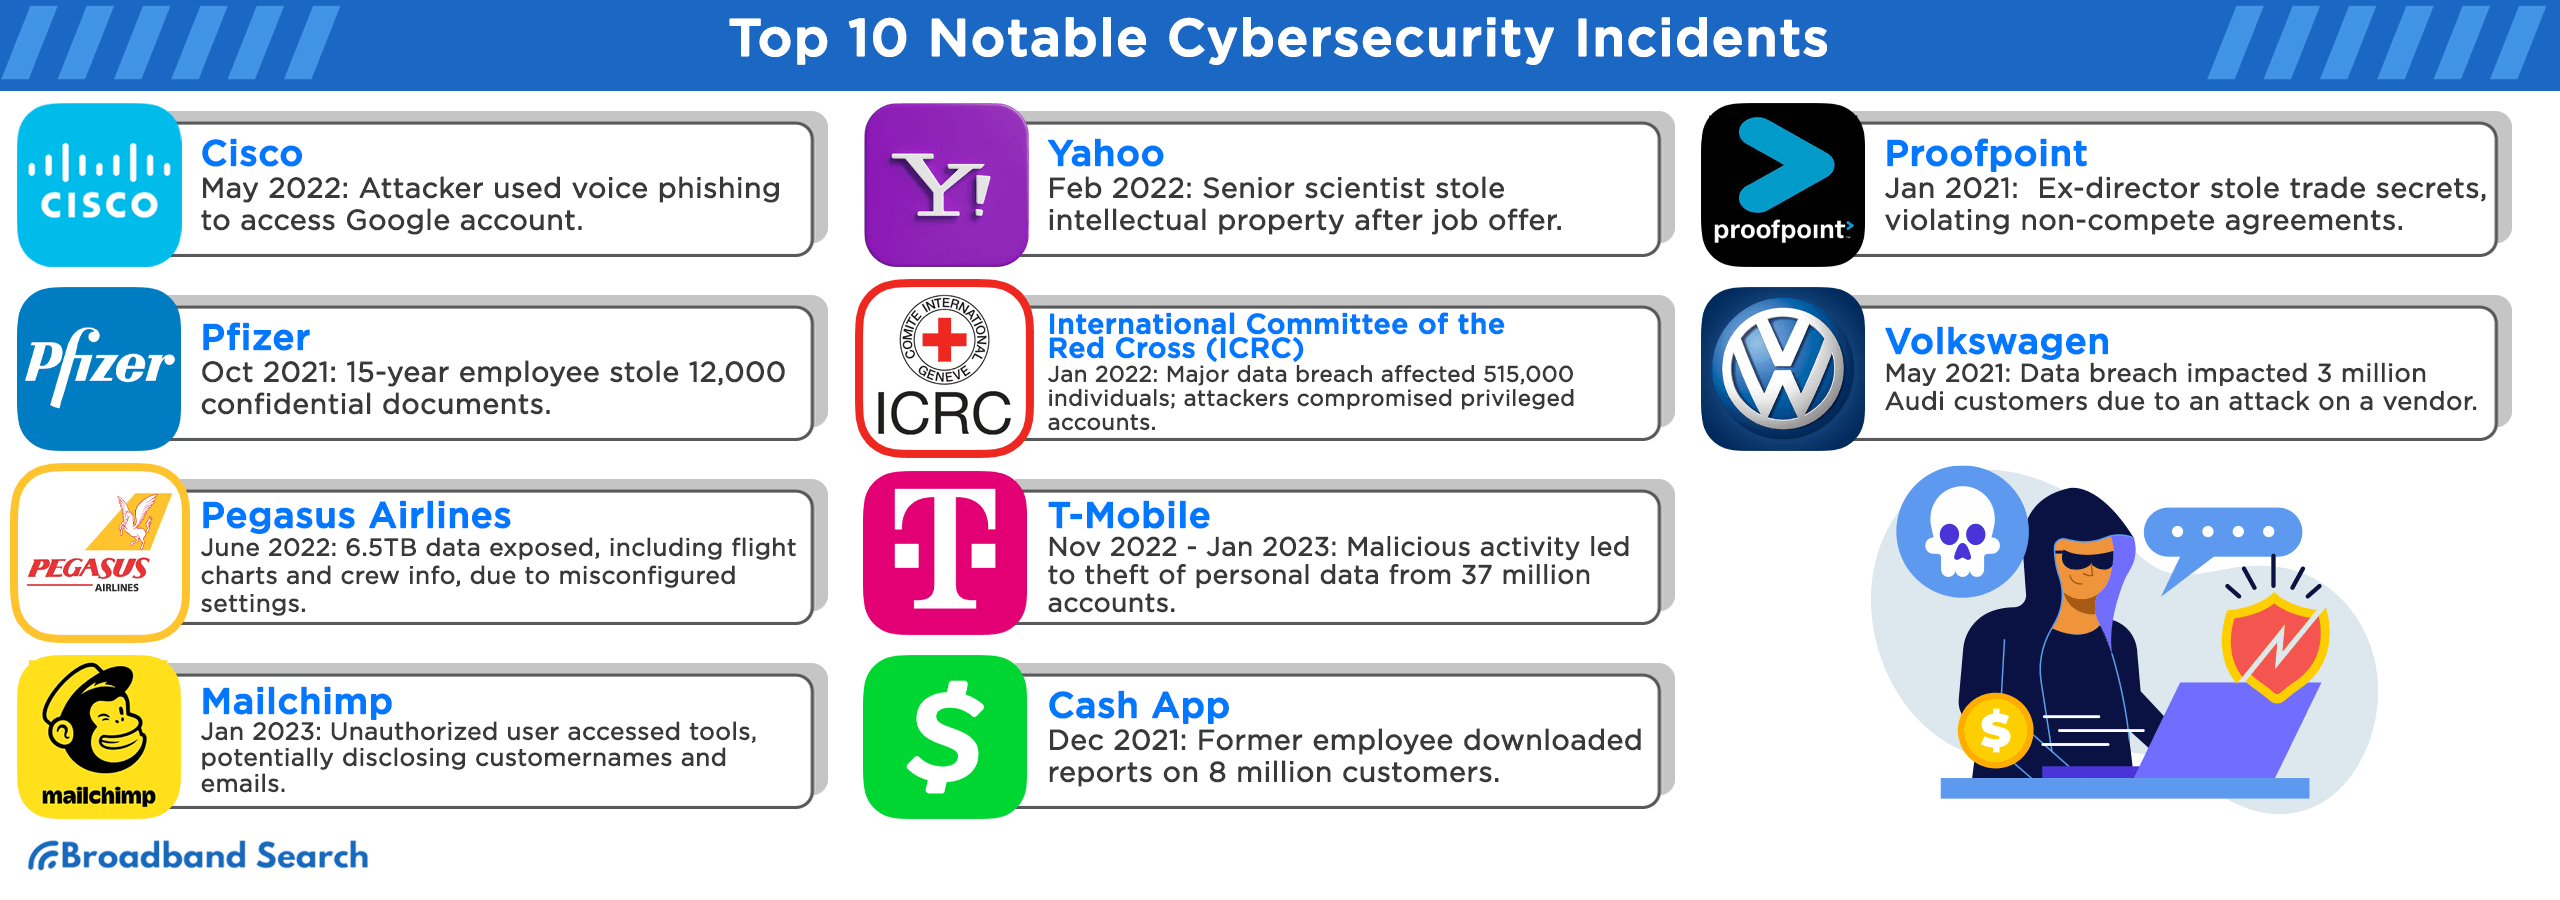 Top 10 notable cybersecurity incidents